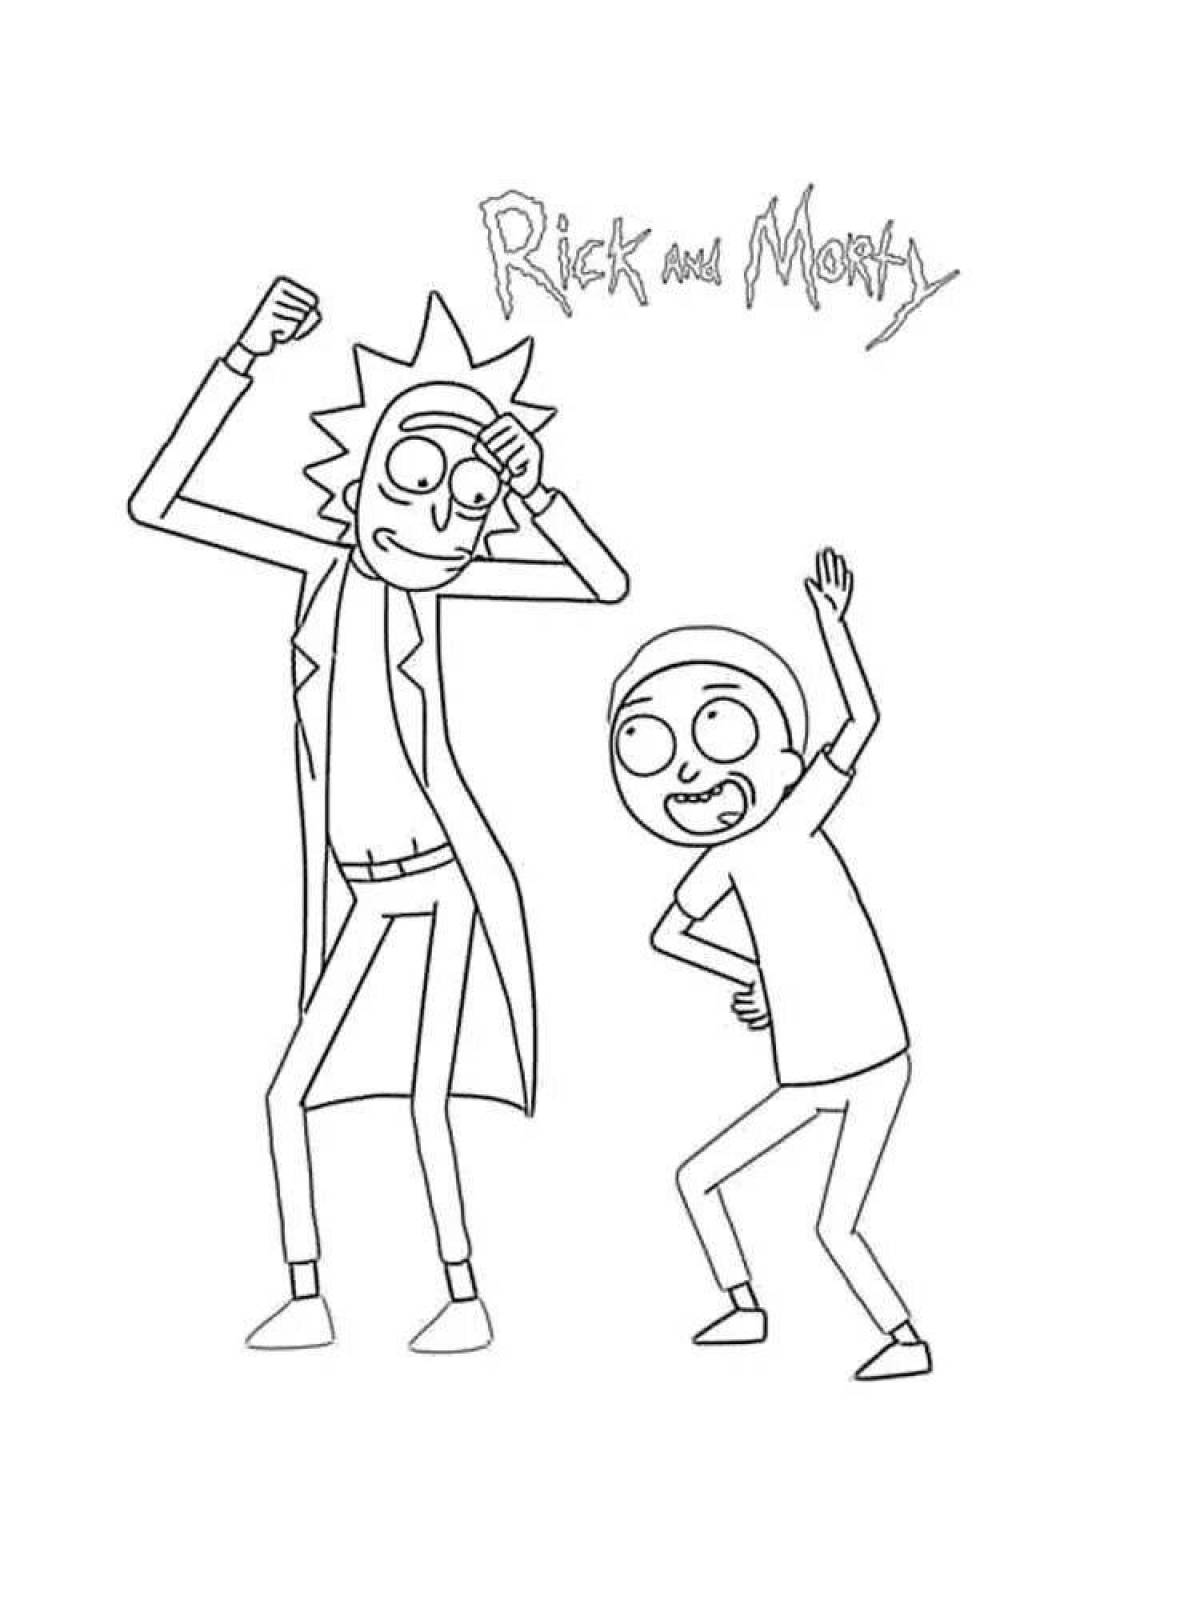 Glowing morty coloring book